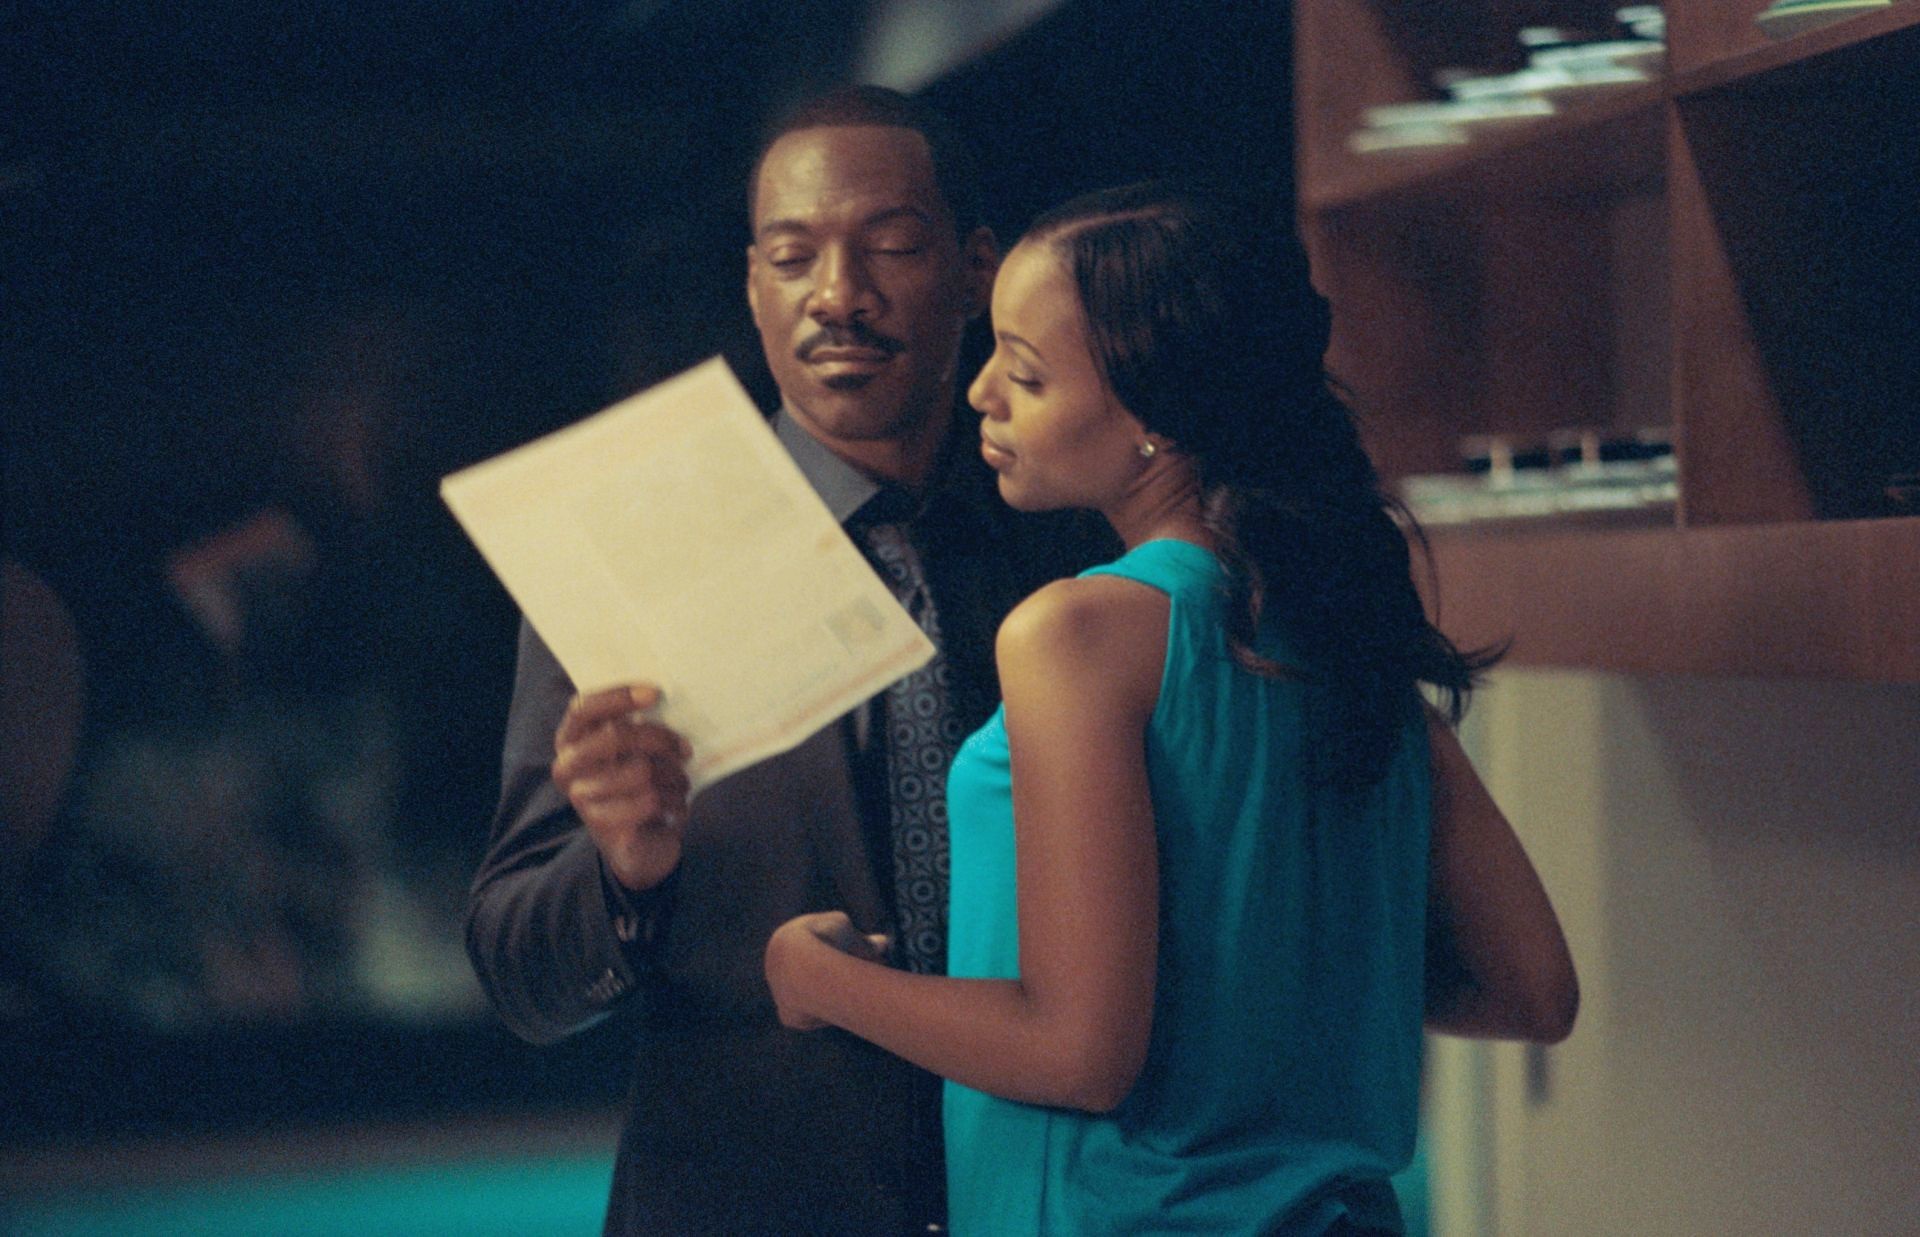 Eddie Murphy stars as Jack McCall and Kerry Washington stars as Caroline McCall in DreamWorks SKG's A Thousand Words (2012). Photo credit by Bruce McBroom.